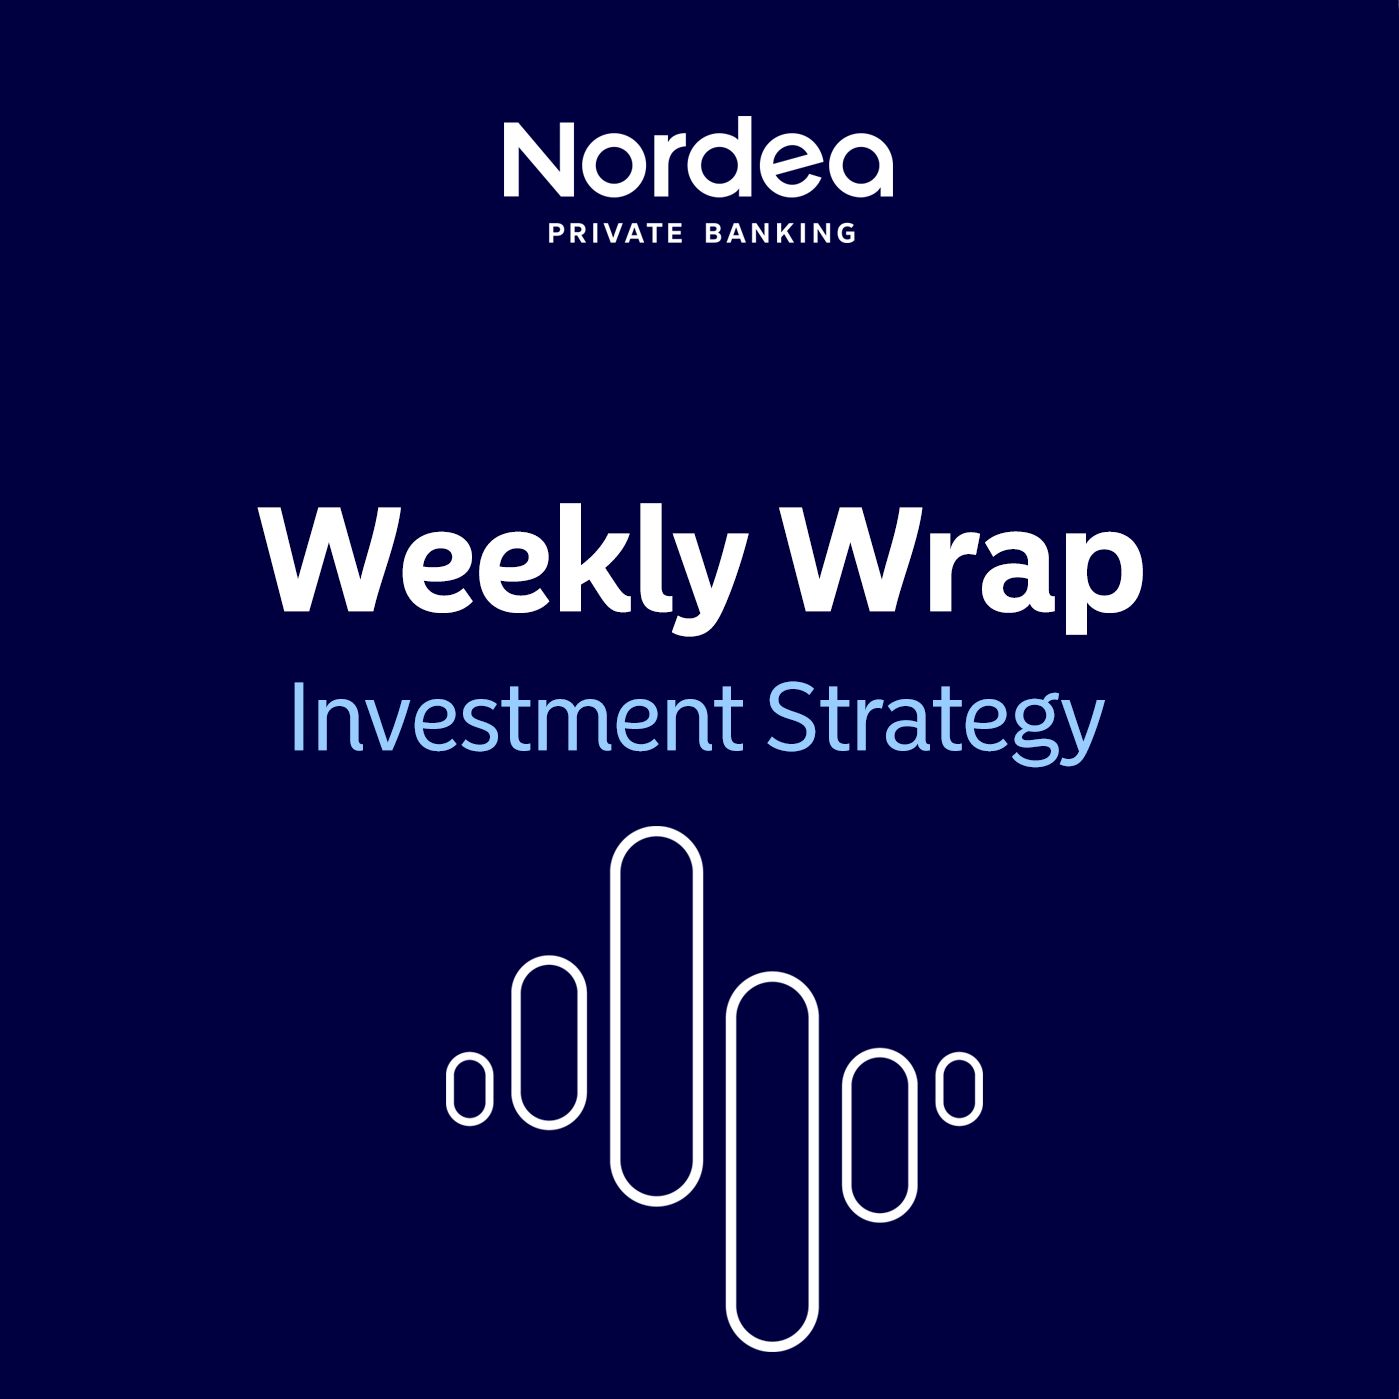 Dollar, Italy risk & threat of protectionism [Weekly wrap, 29/01/18]